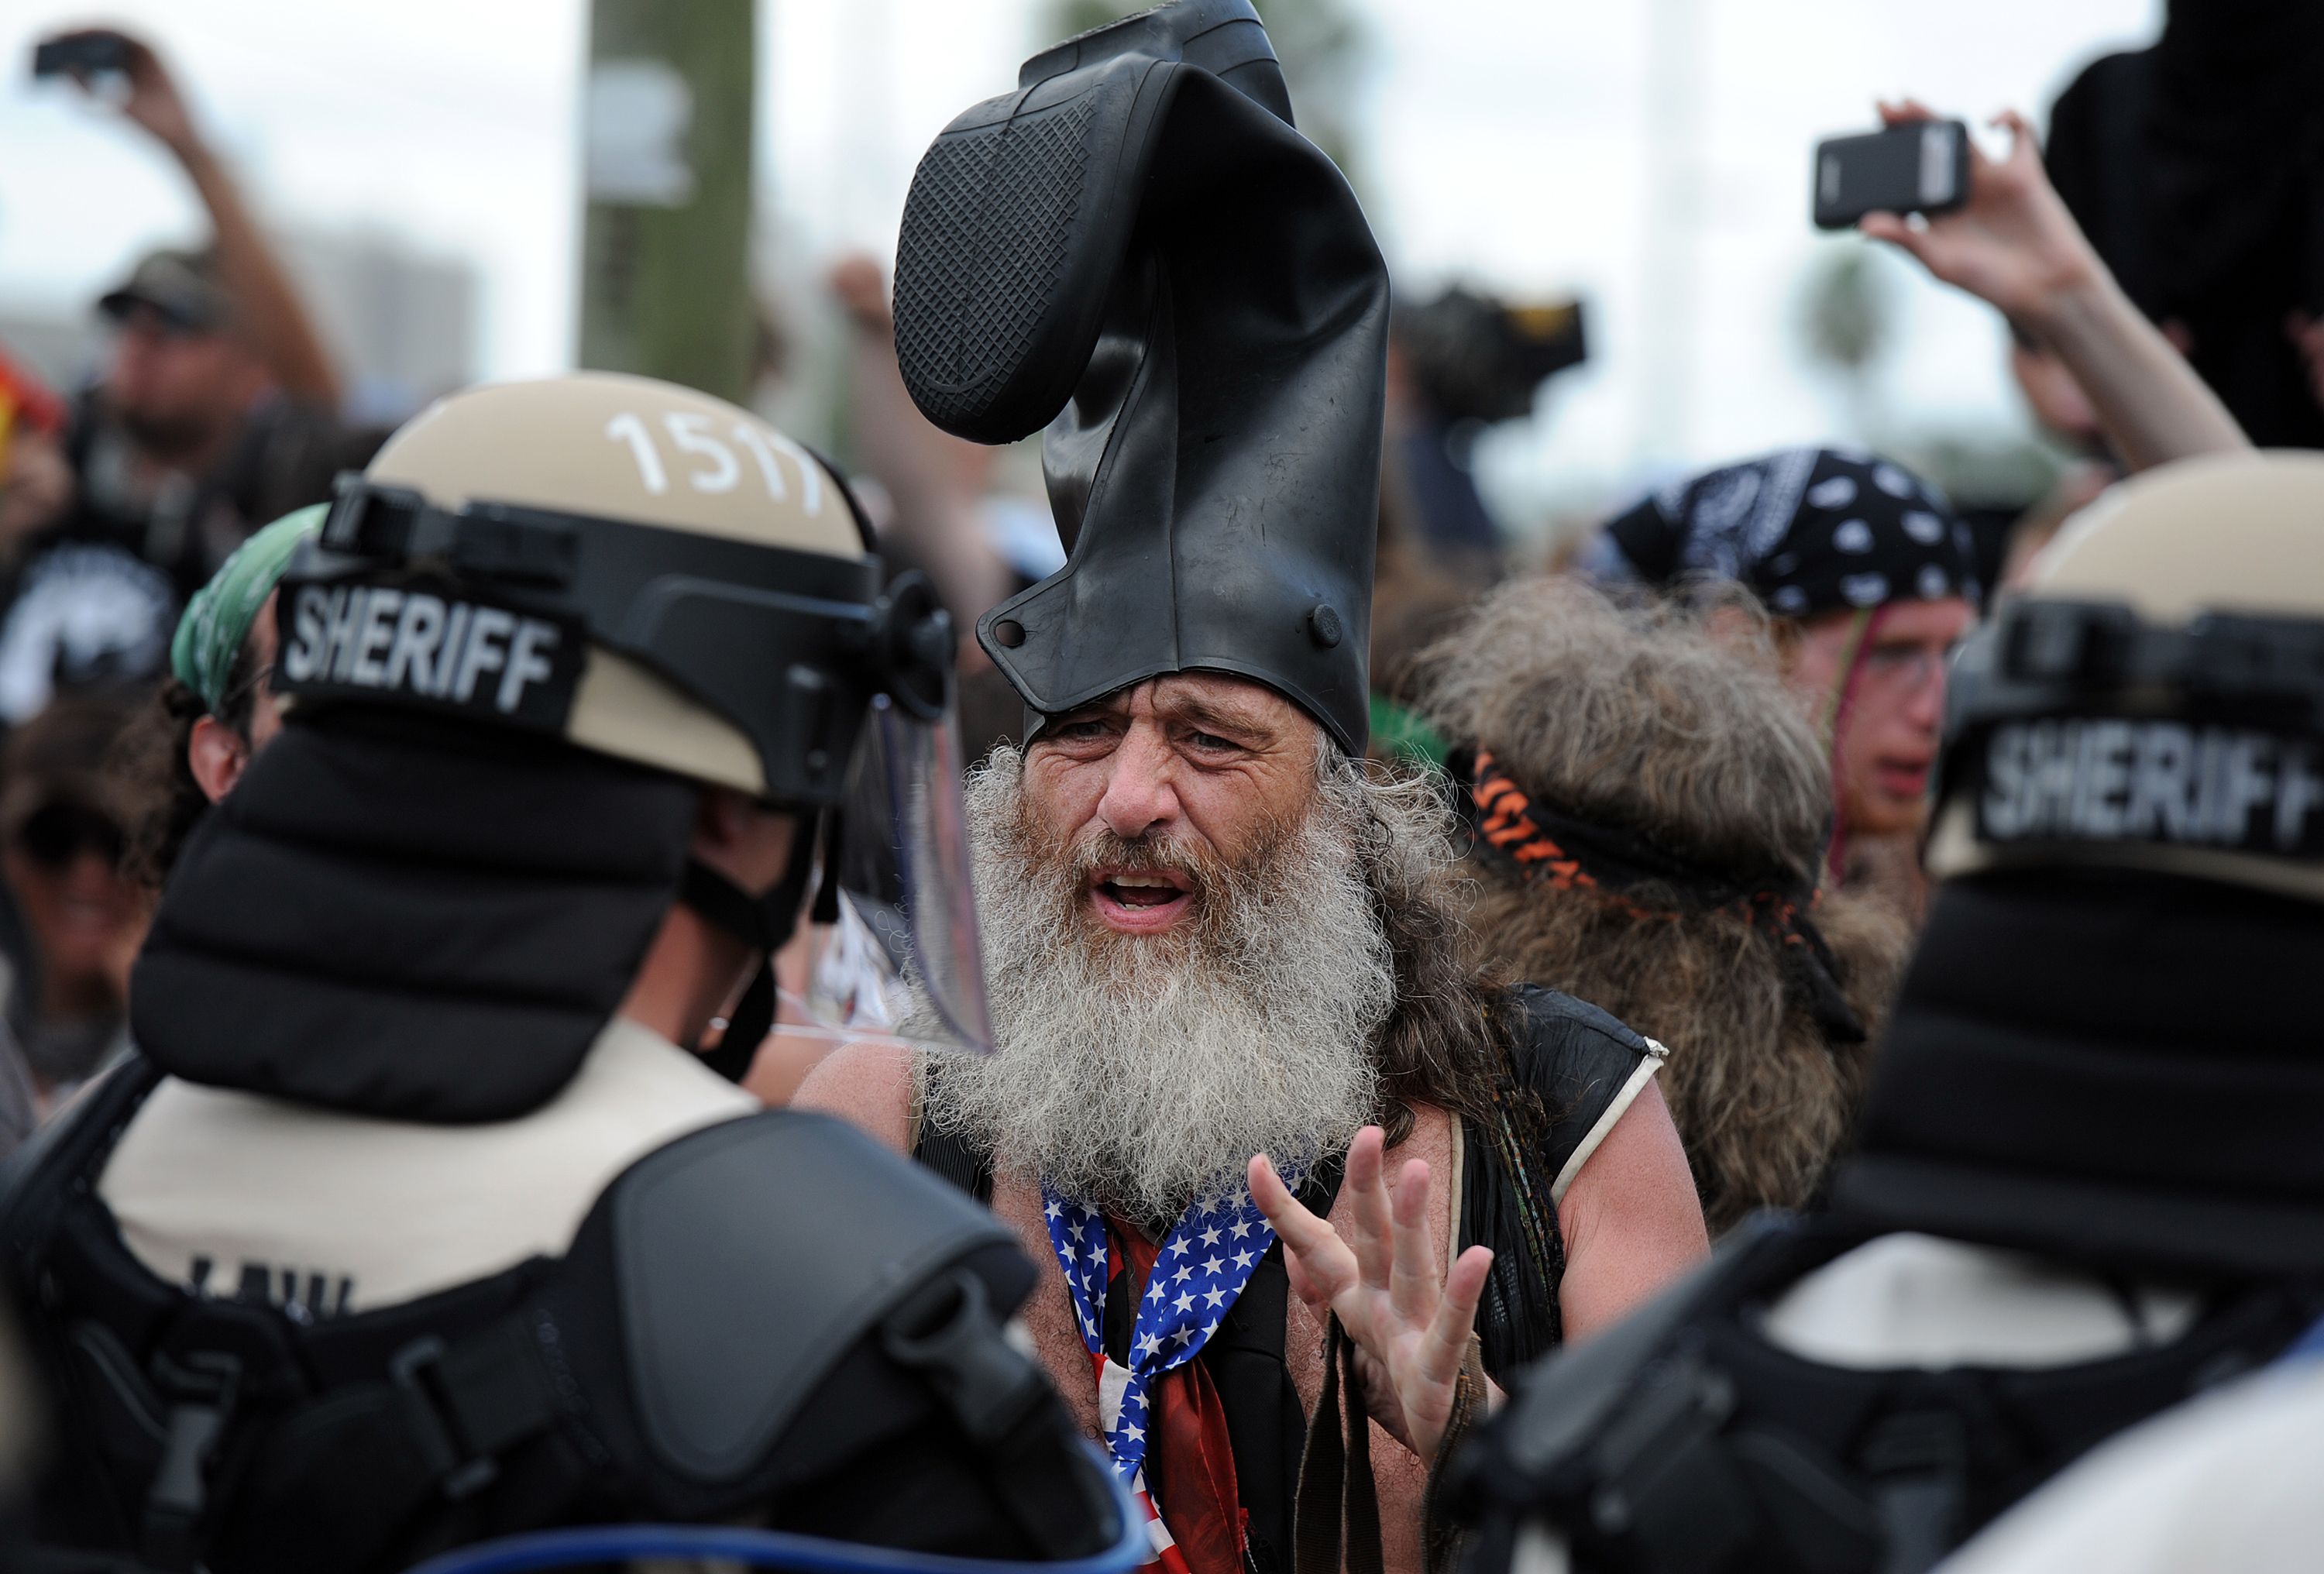 Vermin Supreme: The protester who would be president | Politics